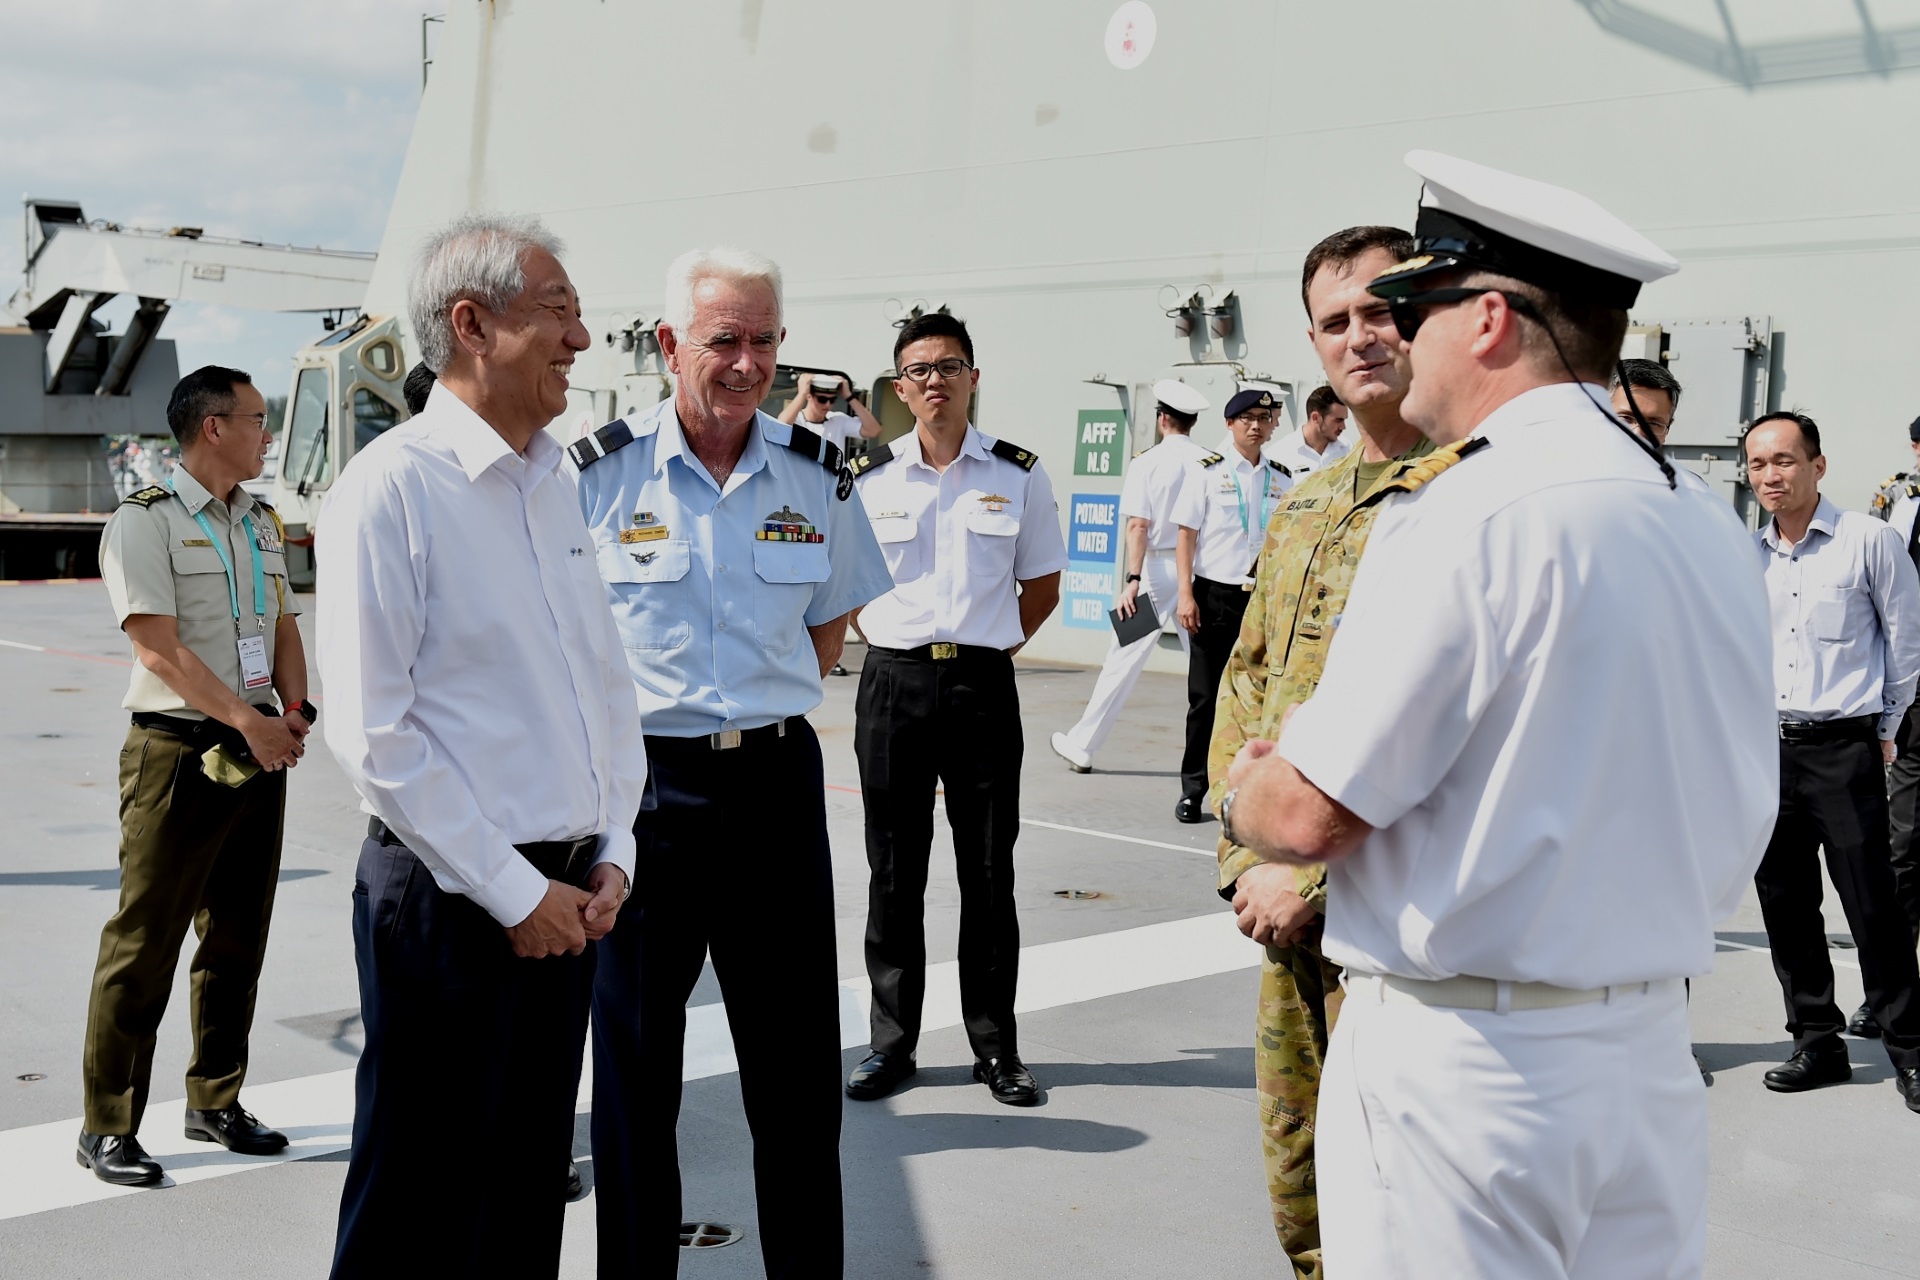 Senior Minister and Coordinating Minister for National Security Mr Teo Chee Hean interacting with personnel on the flight deck of Australian Navy ship, HMAS Canberra.